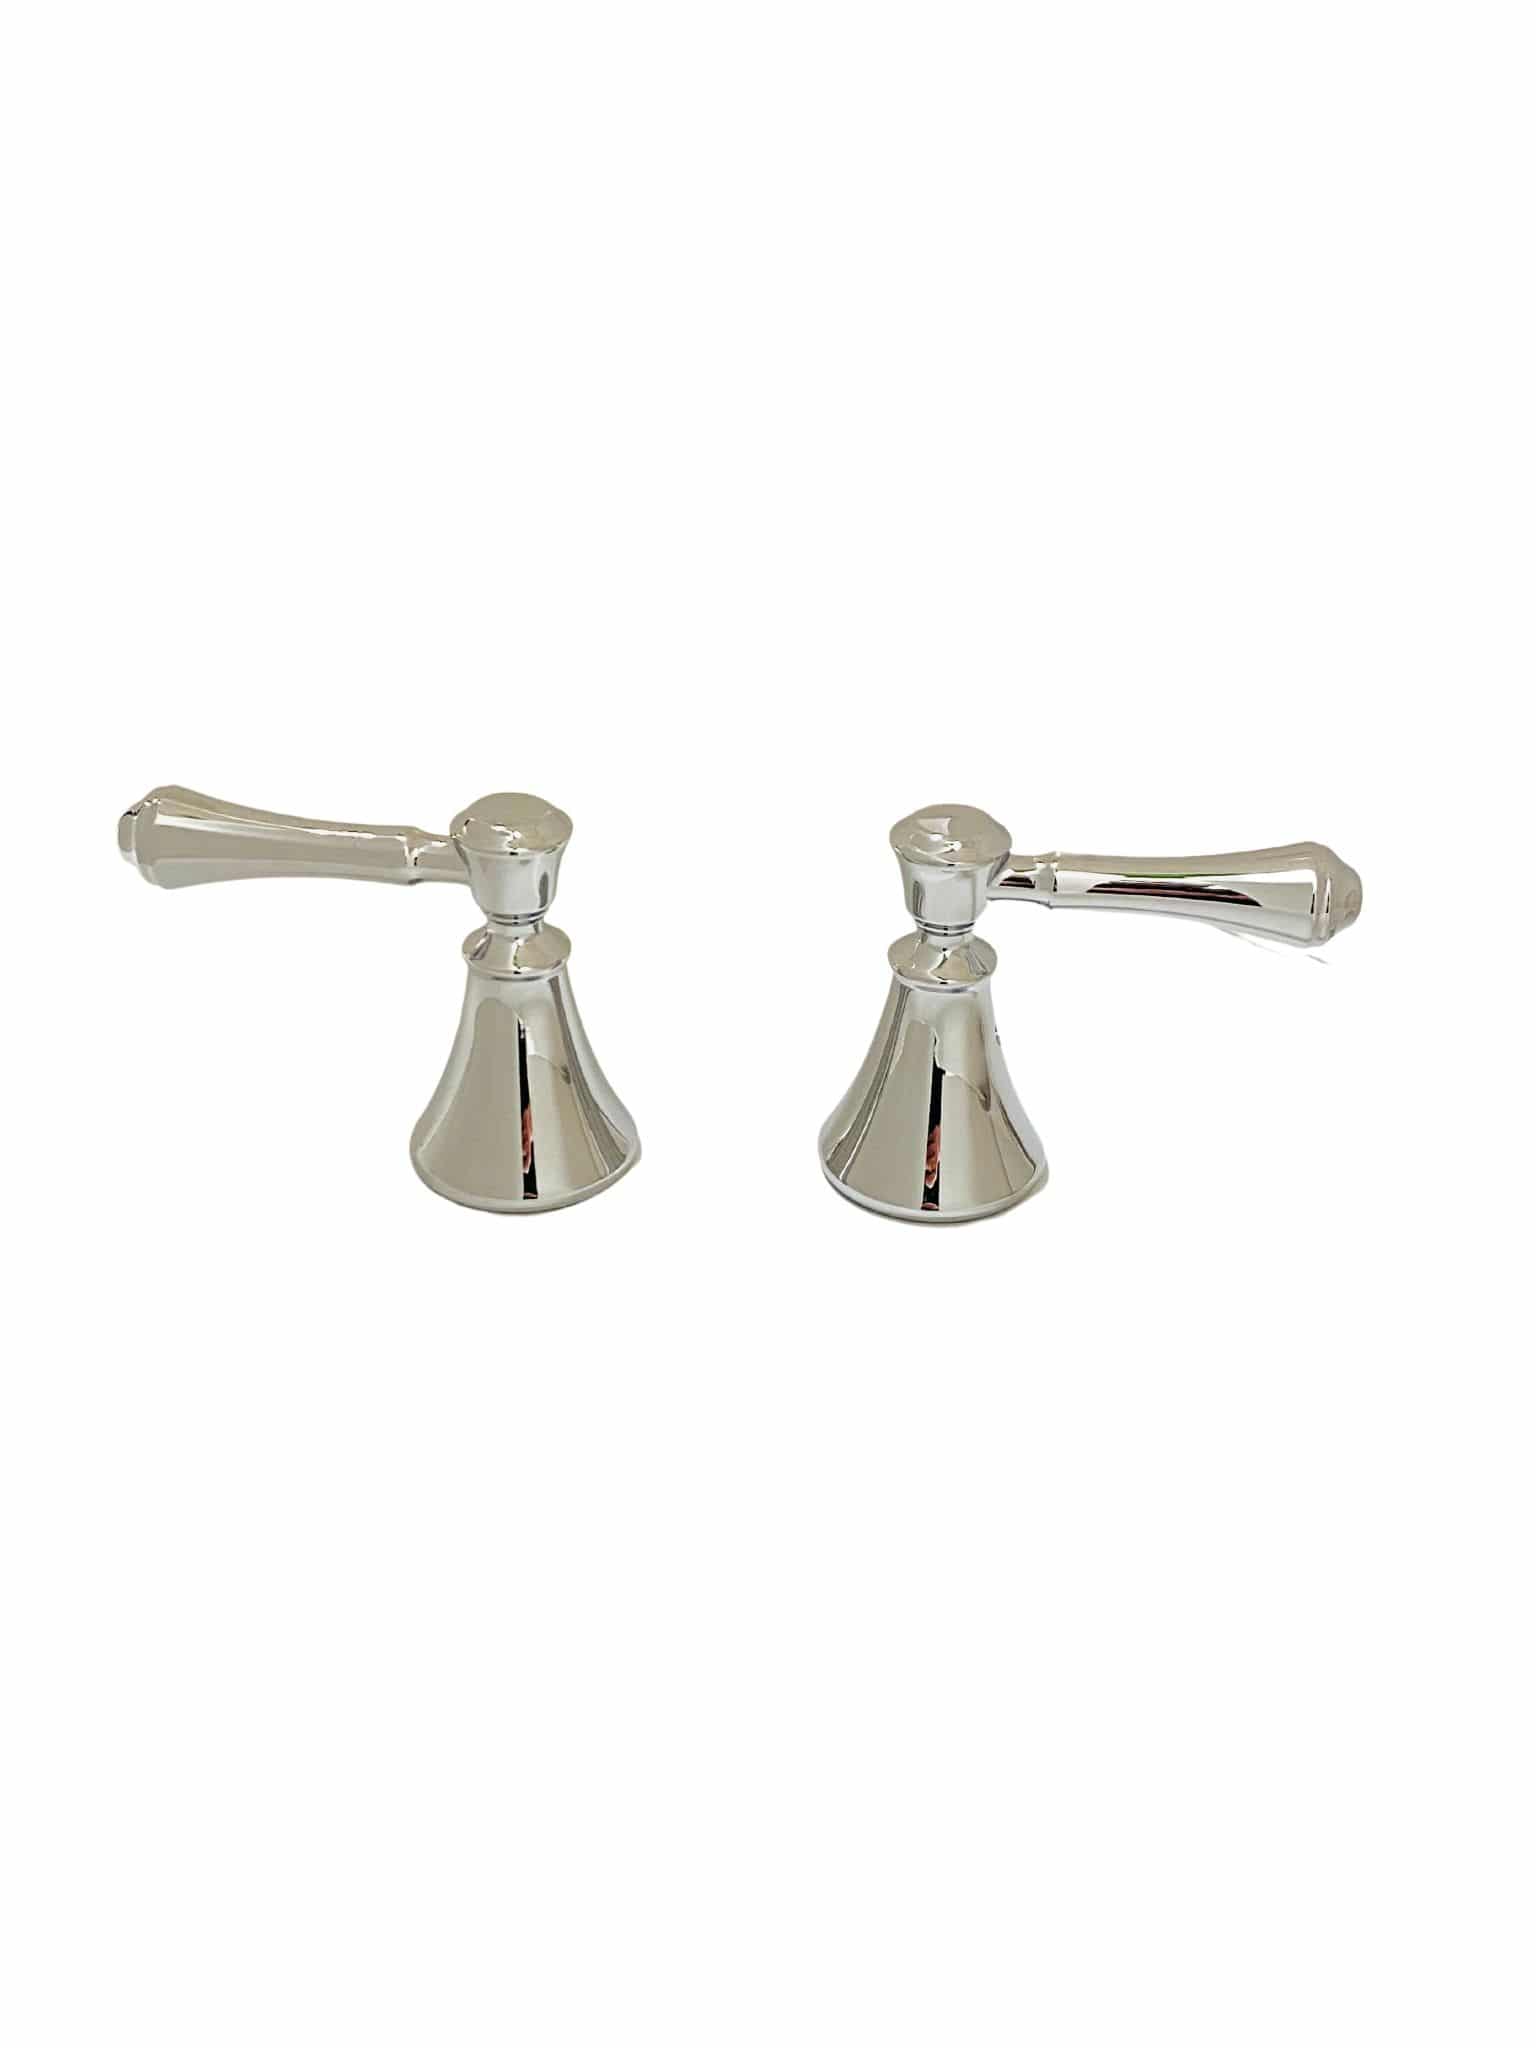 Delta H297 Cassidy Set of Two Lever Handles for Bathroom Faucet